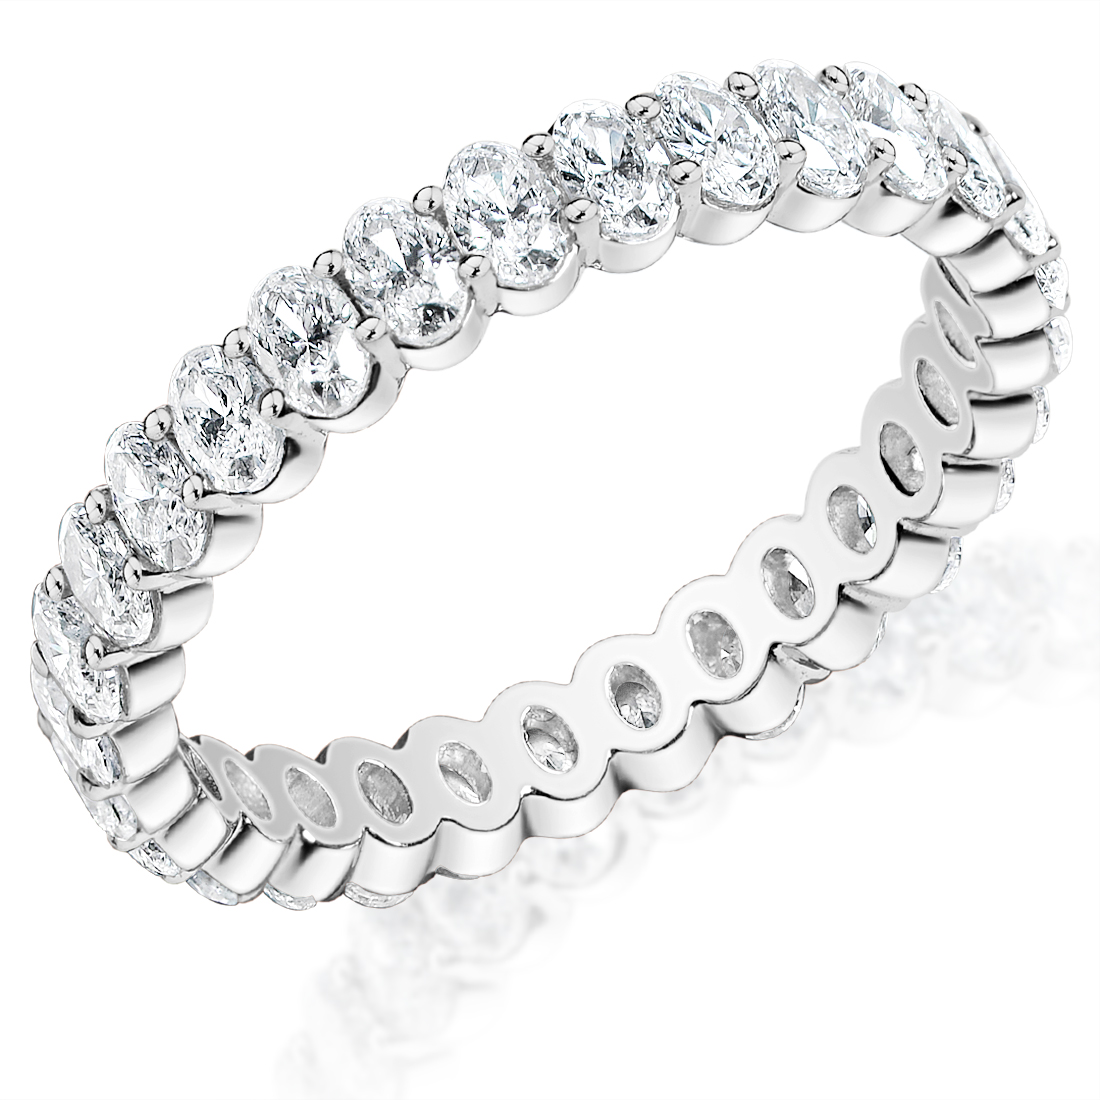 Oval Shared Prong Eternity Band